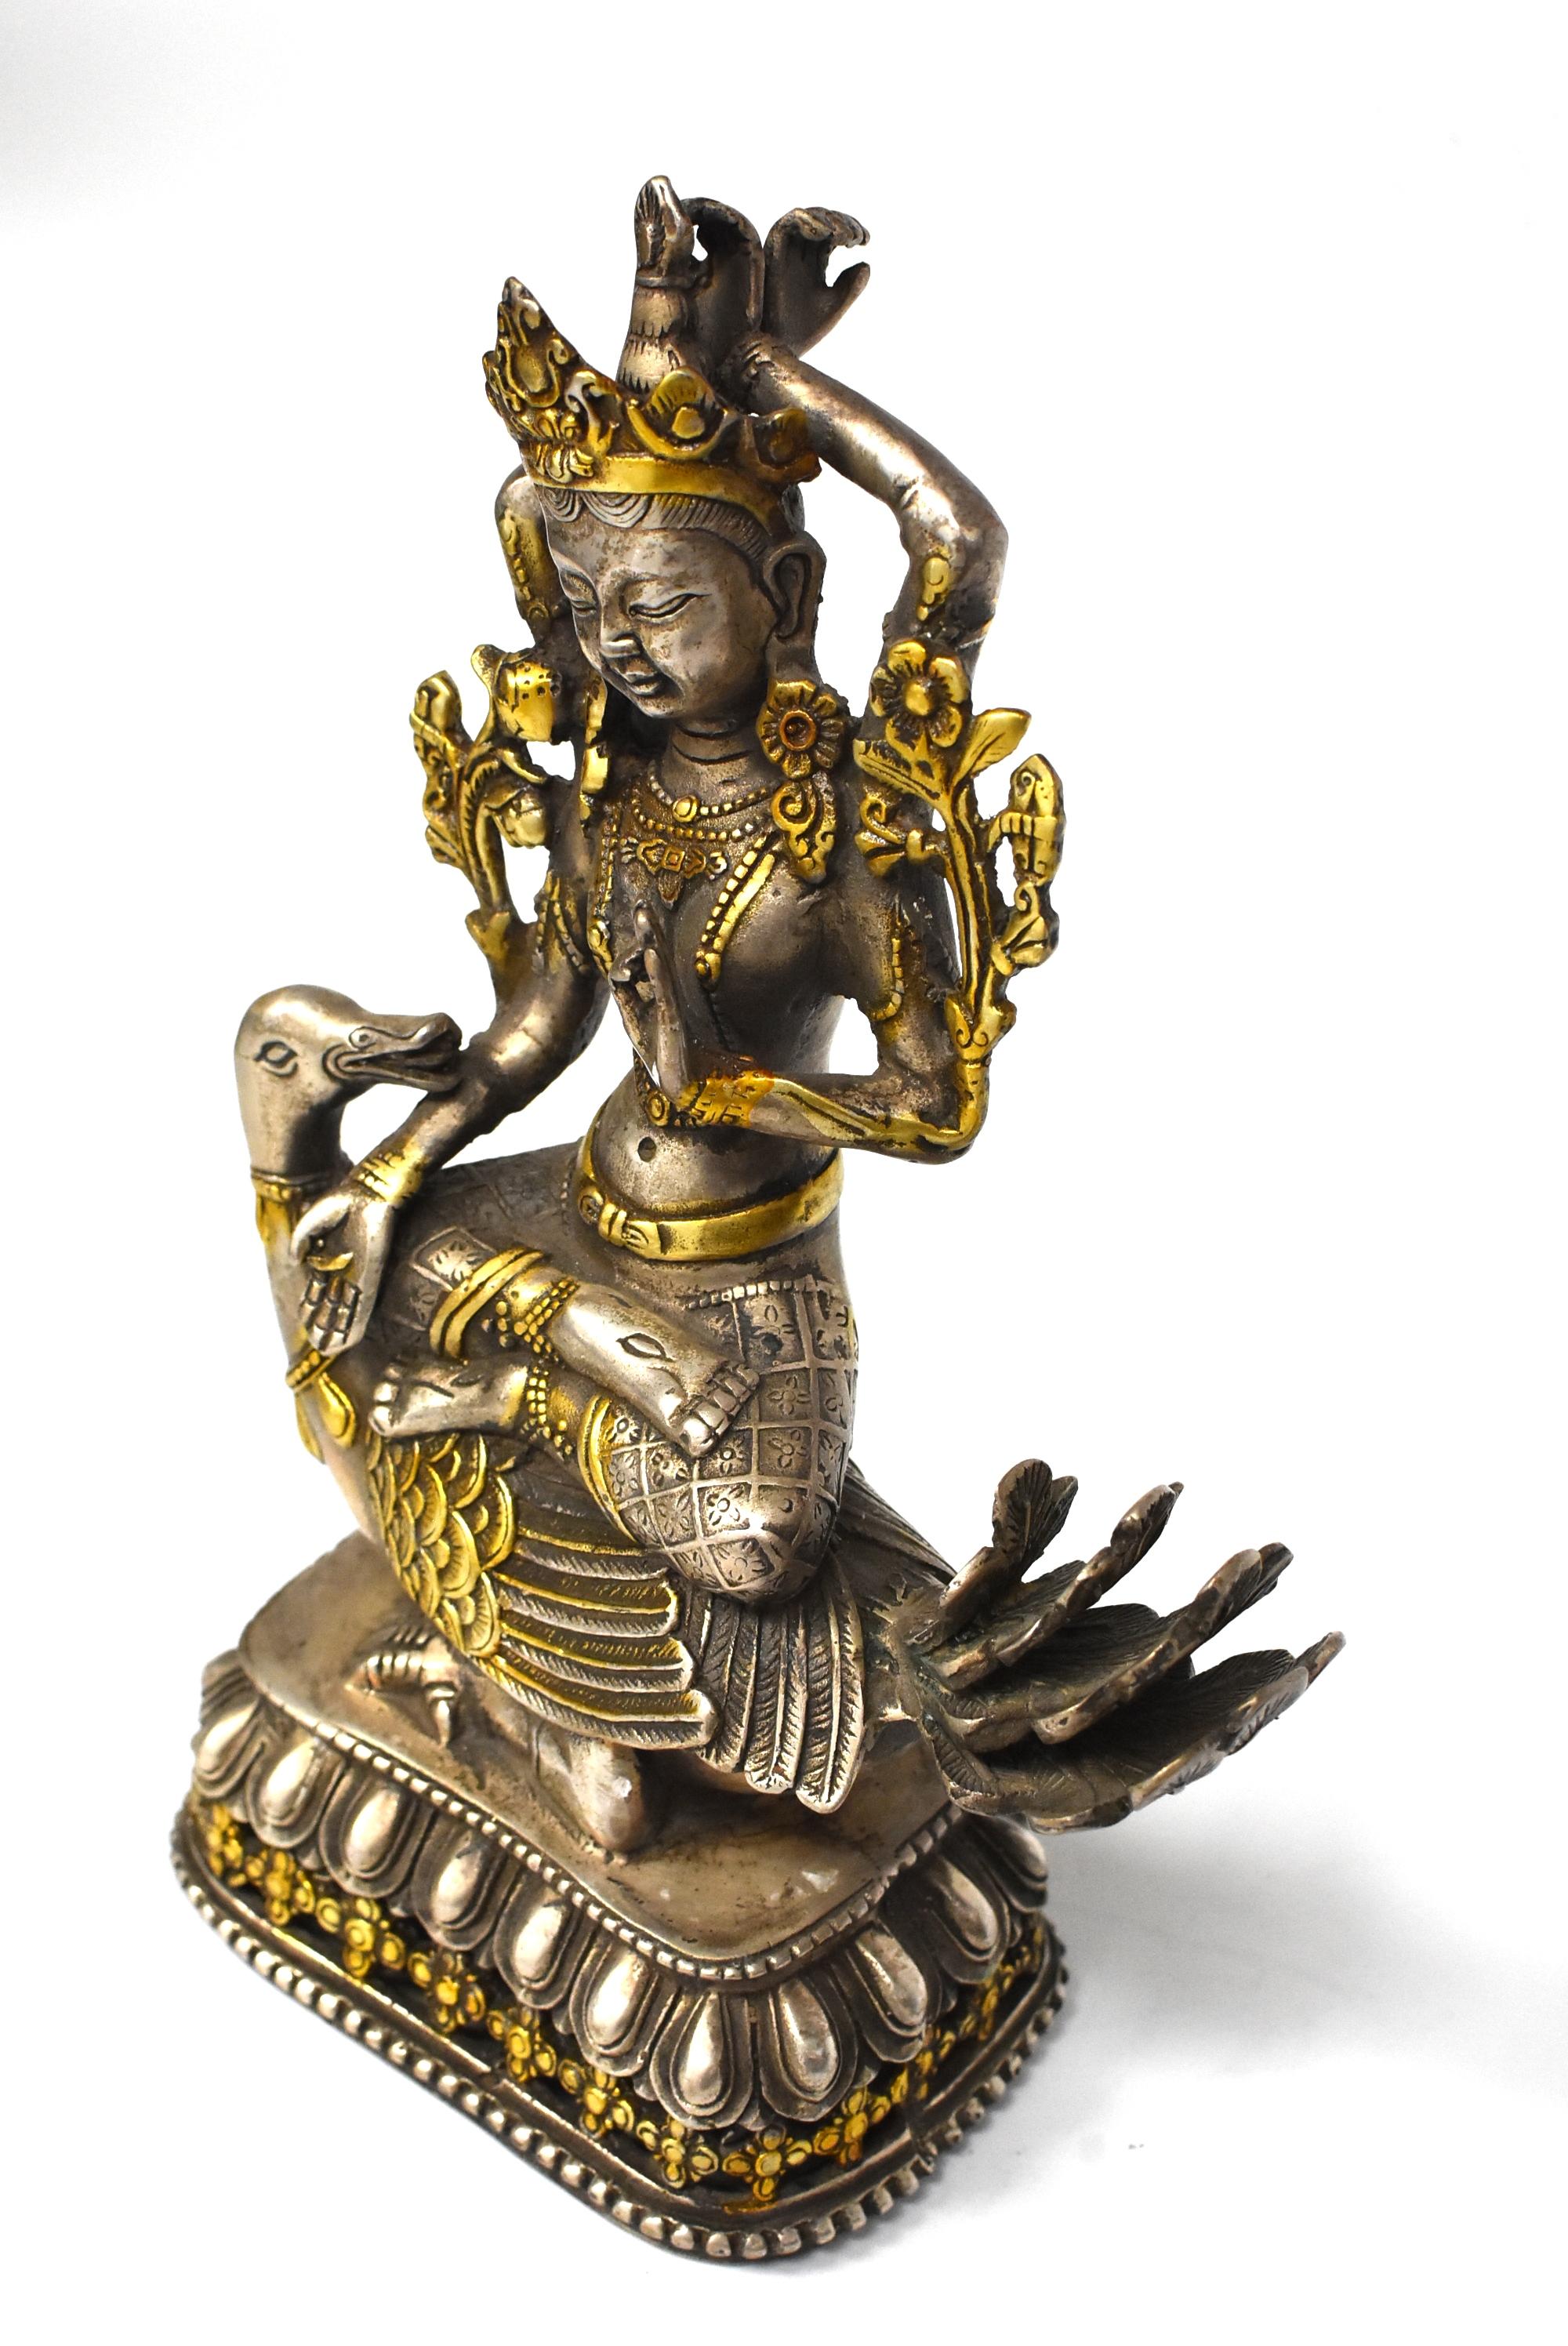 Featured a beautiful silvered bronze sculpture of Tibetan Tara with an recumbent goose. The Tara is decorated with flowers, lariats, ankle bracelets and cuffs. She wears an elaborate crown and is seated on top of a goose above a lotus throne. Tara